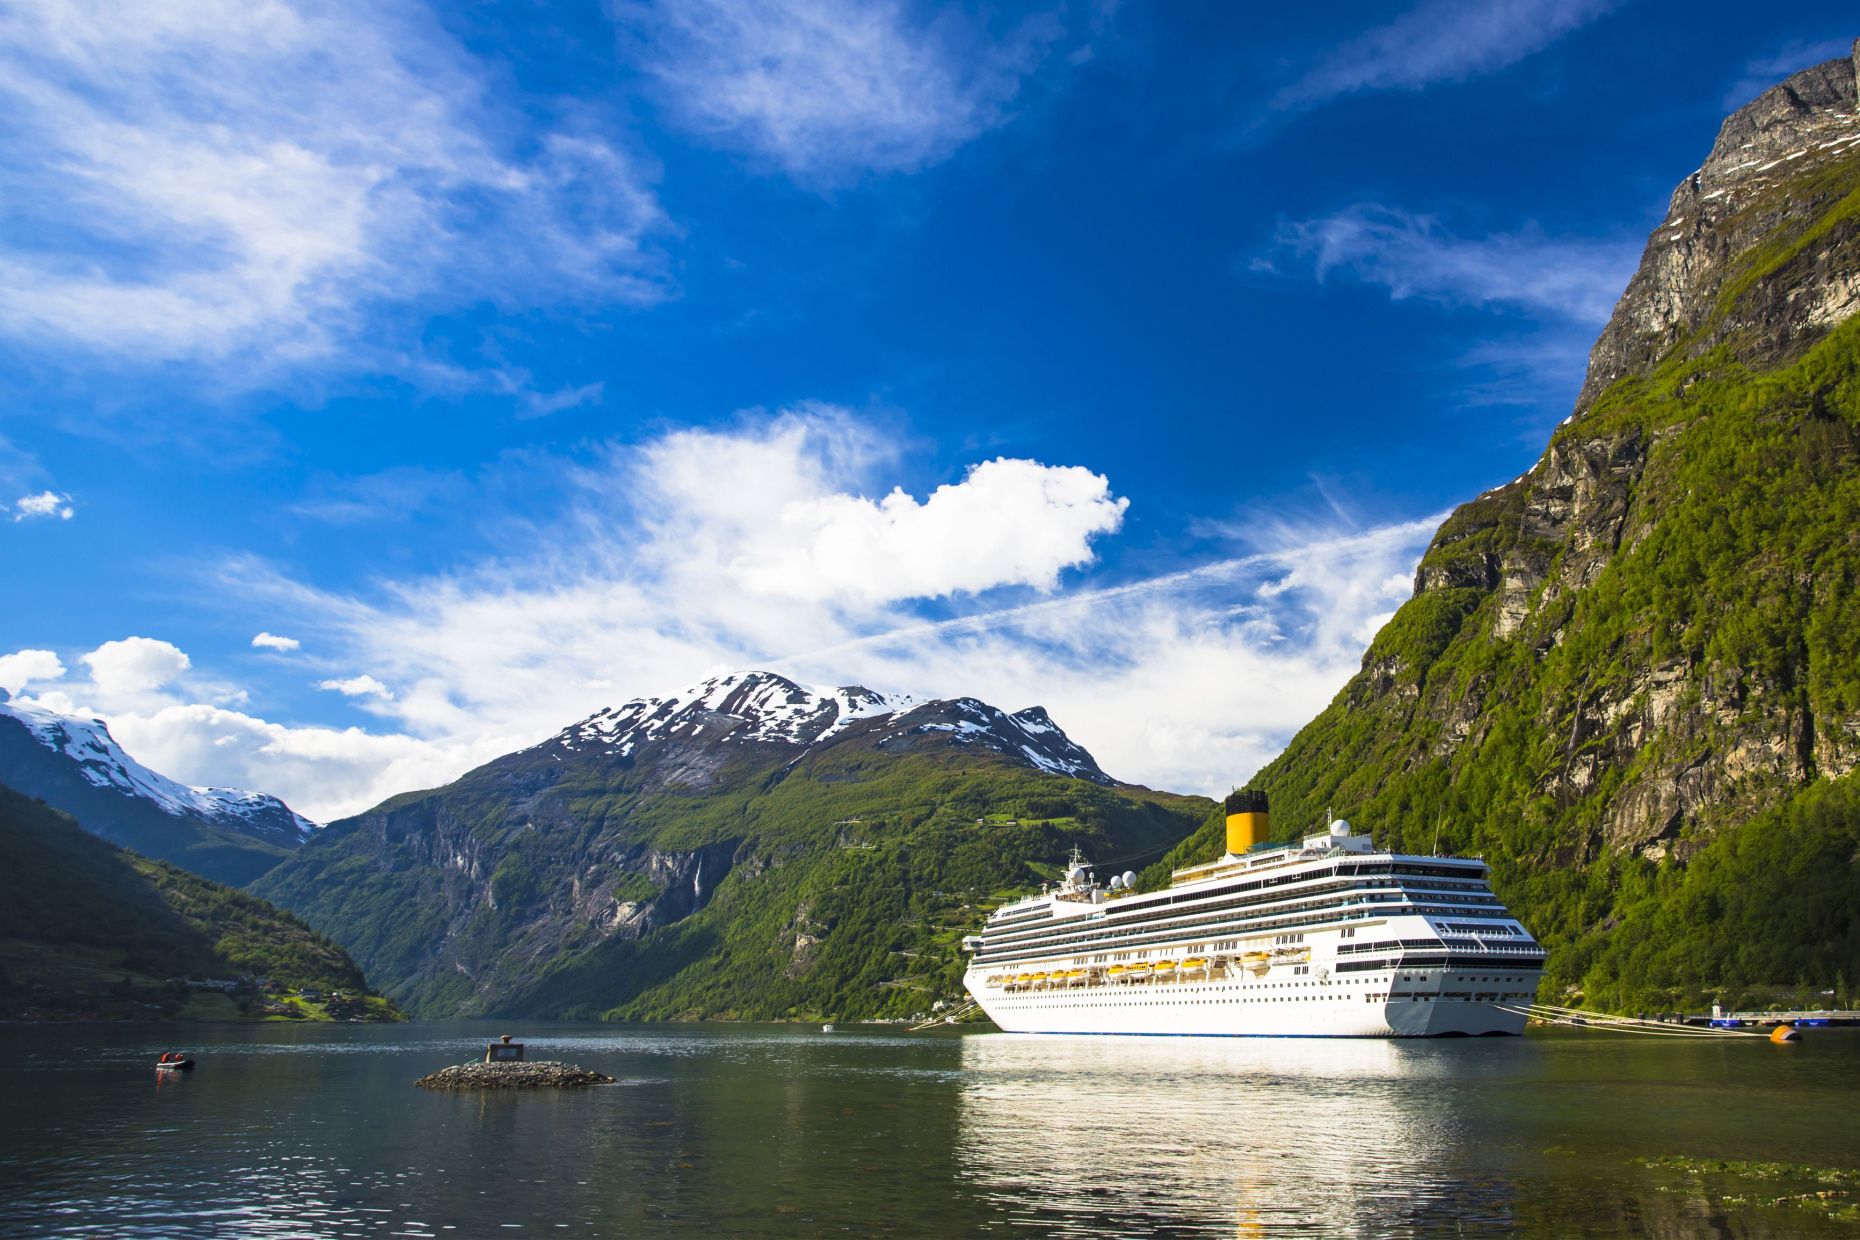 Norwegian fjords cruise ship at anchor in Geiranger, Norway.